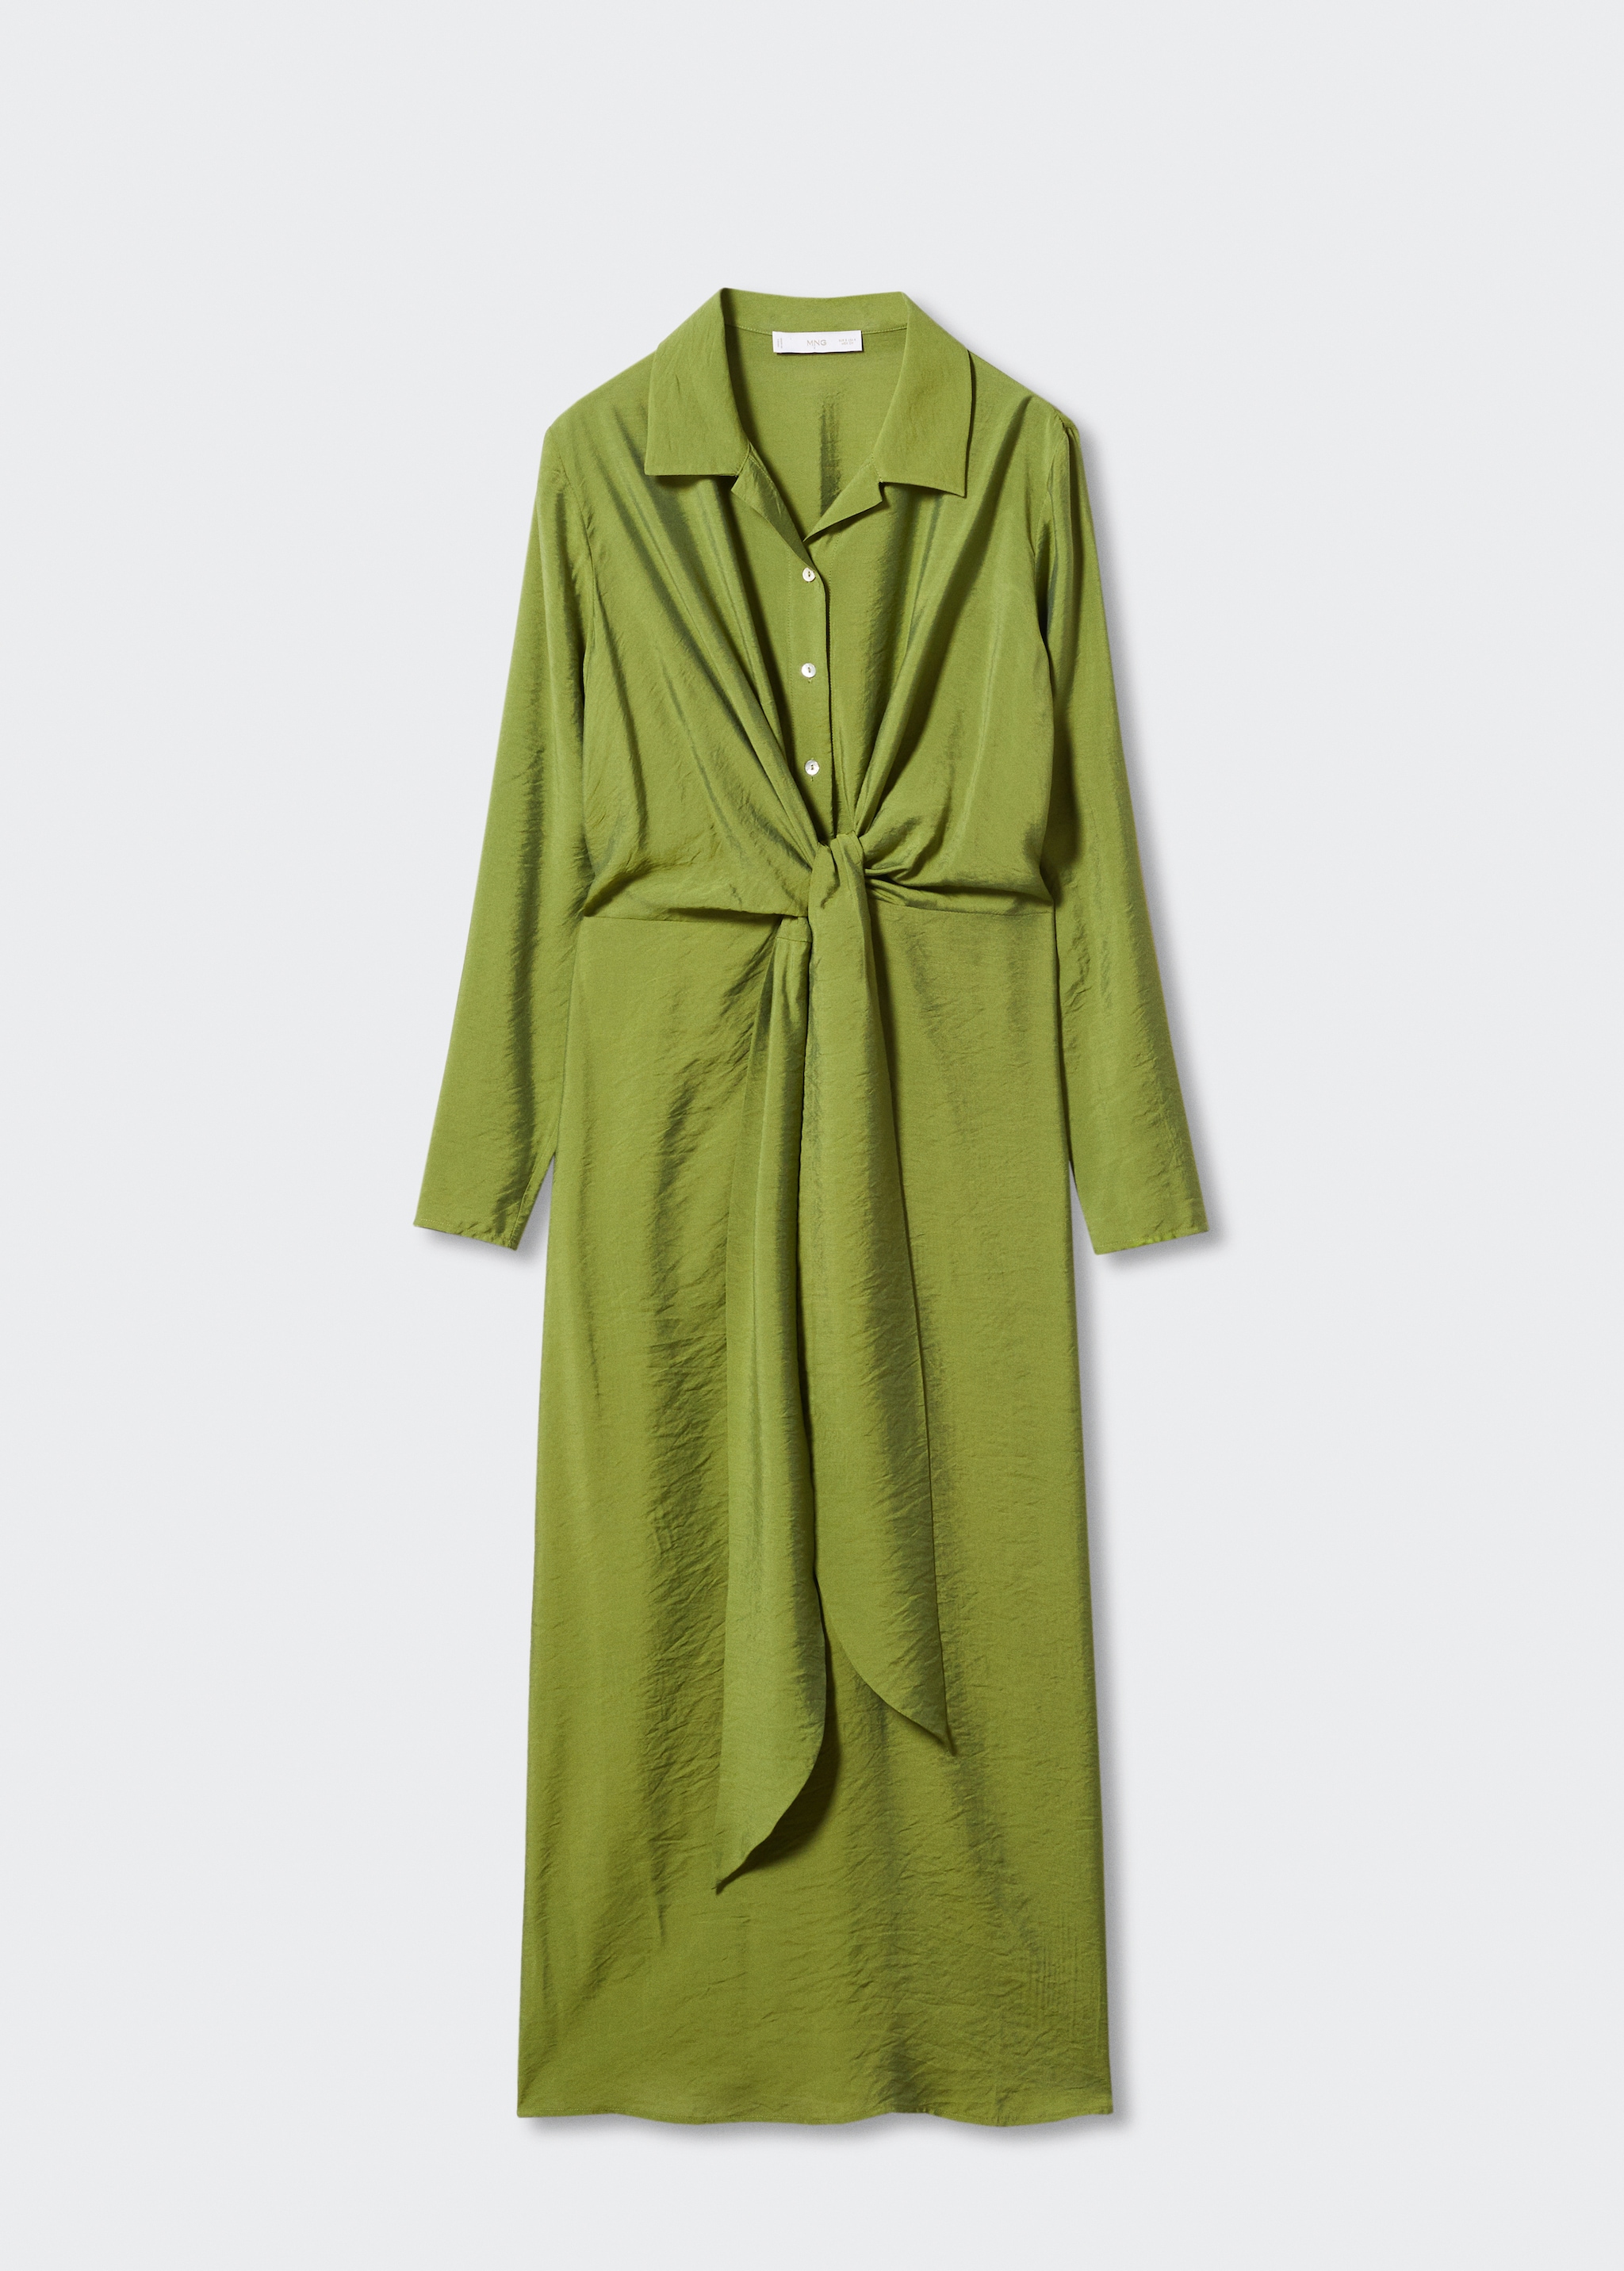 Knot detail shirt dress - Article without model